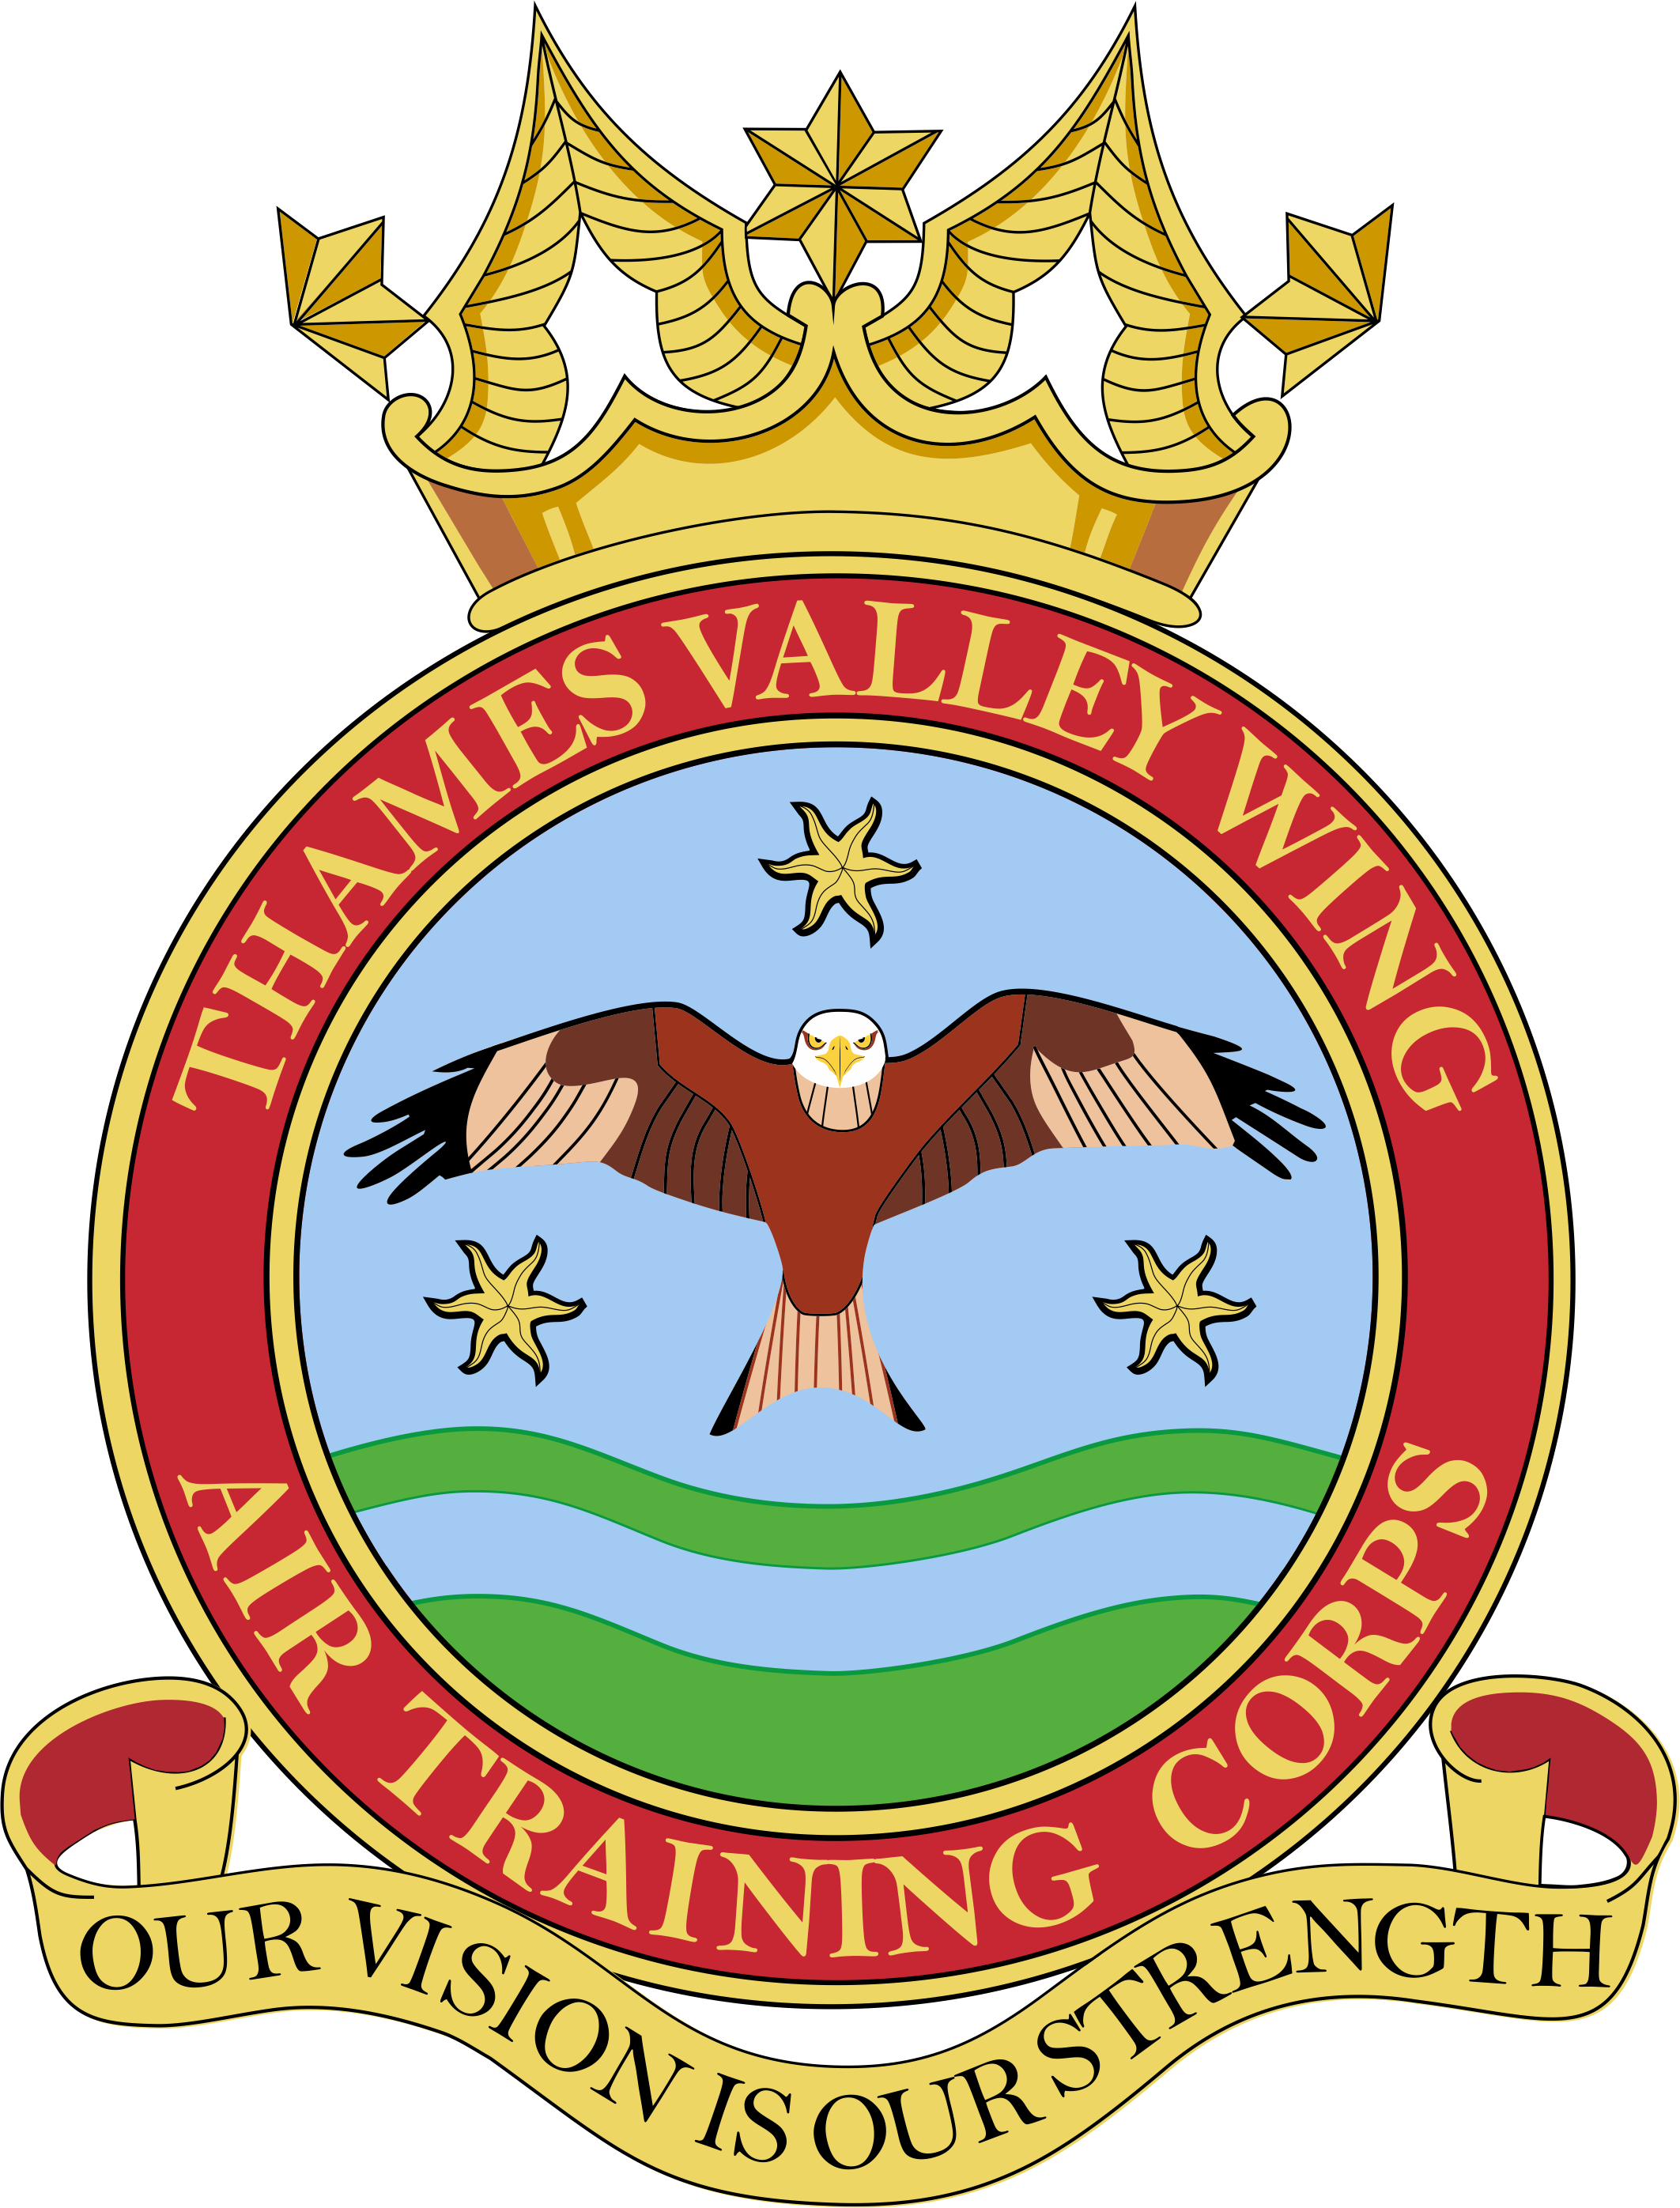 Thames Valley Wing ATC website